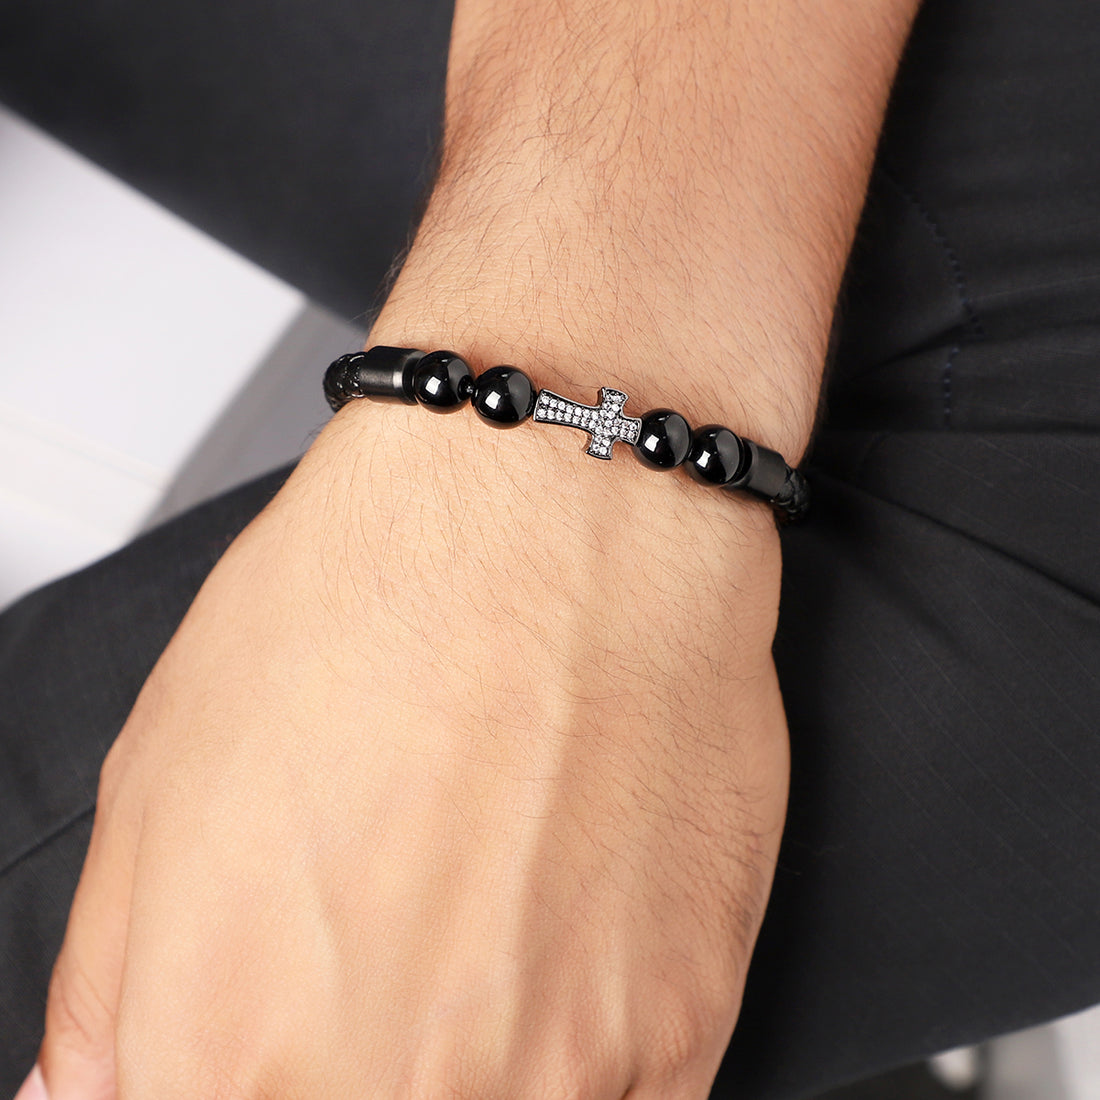 Wrist shot of the bracelet stylishly paired with an edgy outfit, capturing its unique charm